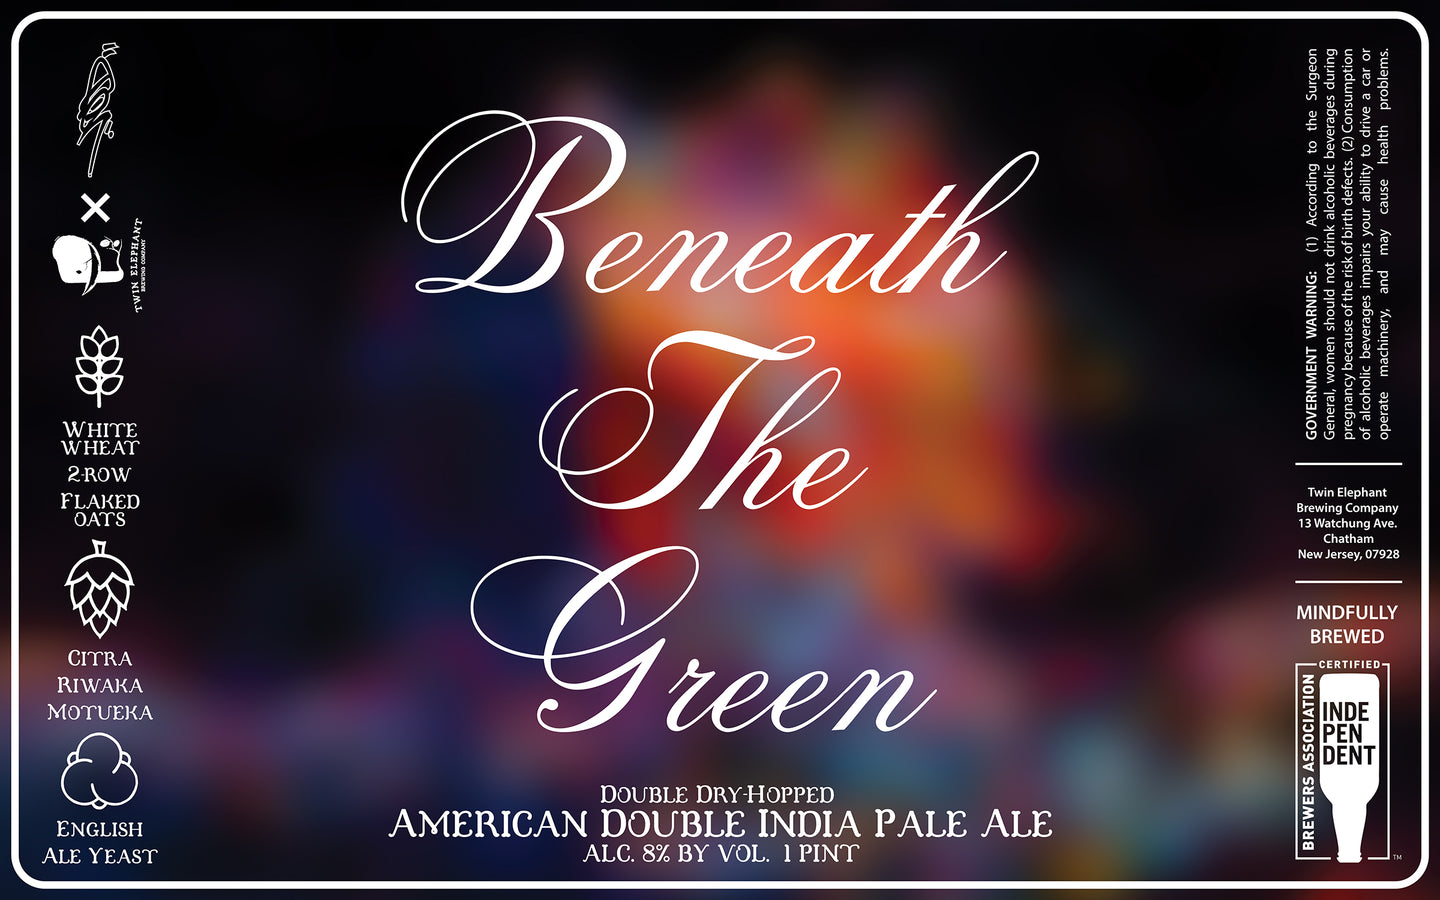 Beneath The Green - Four Pack